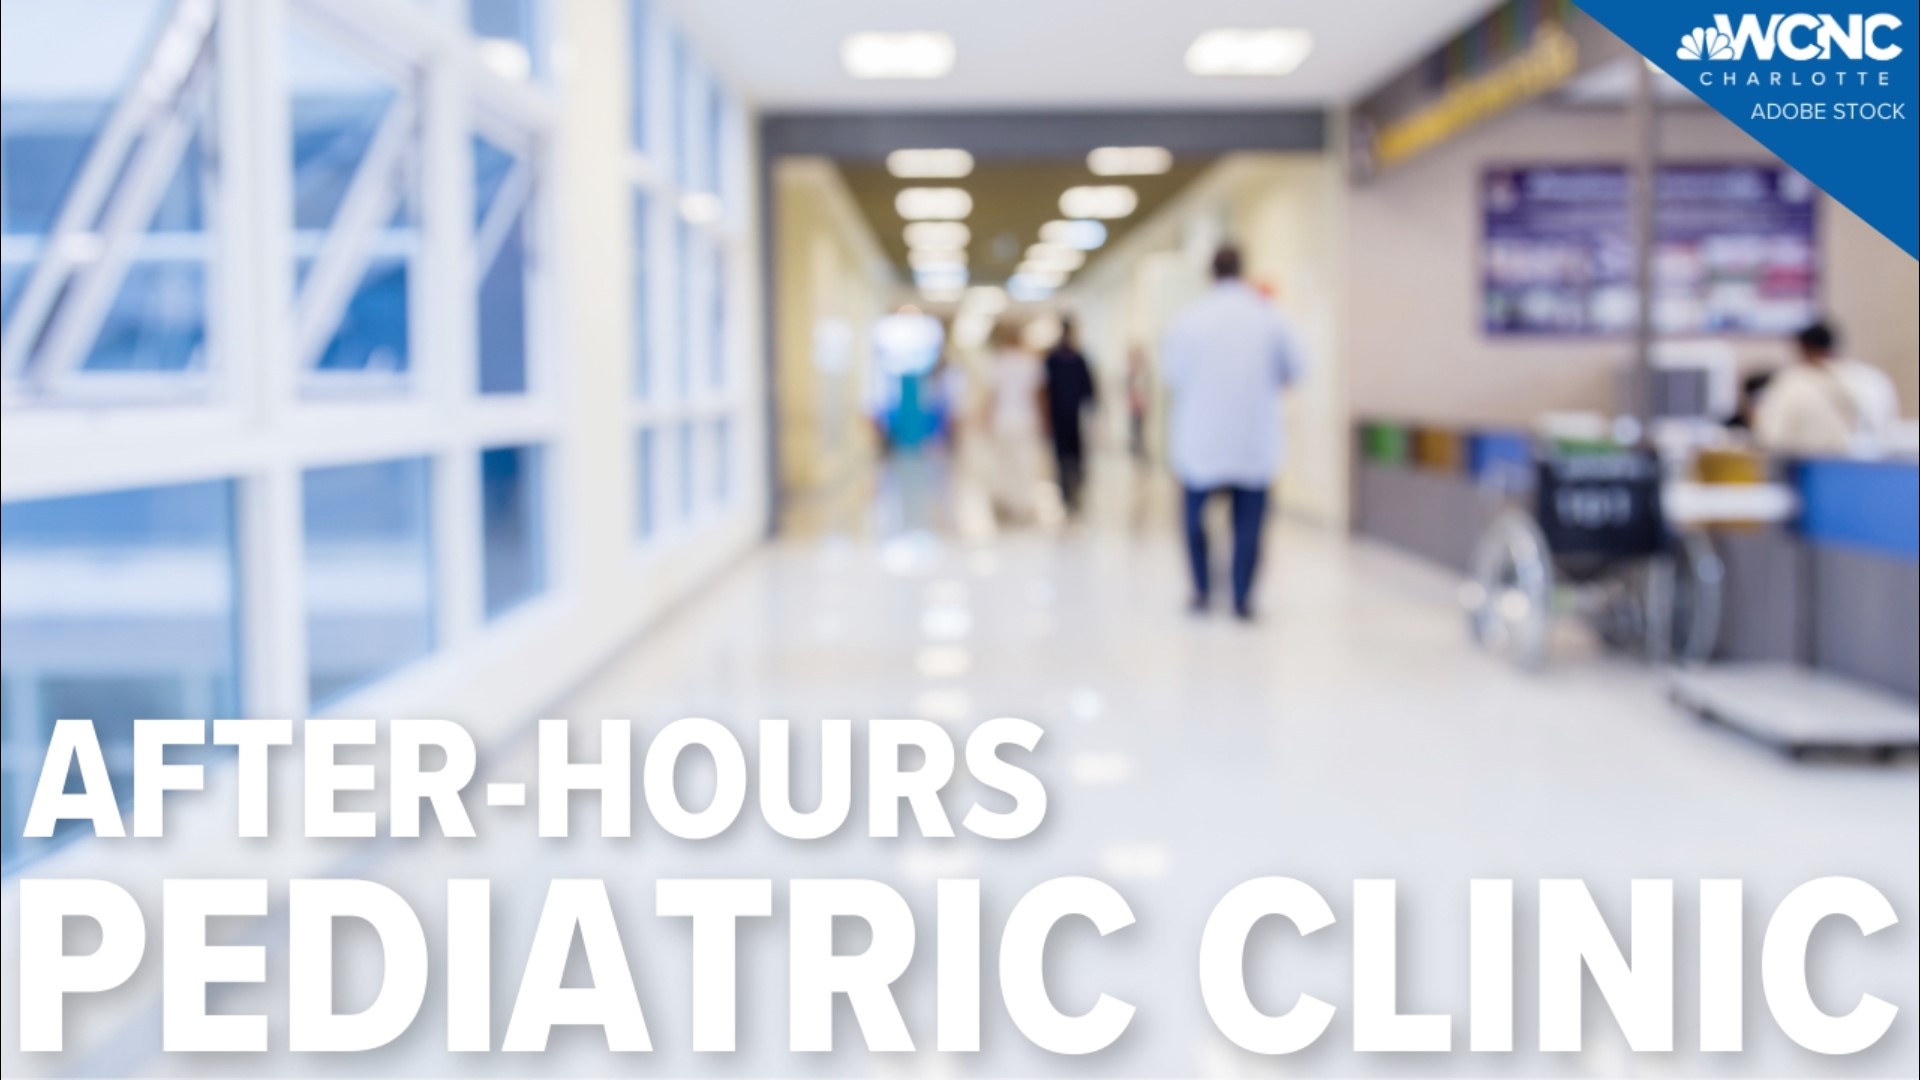 Novant Health Pediatrics After Hours Care - Carmel will be staffed by a team of highly qualified pediatric providers and will treat any patient under 18.